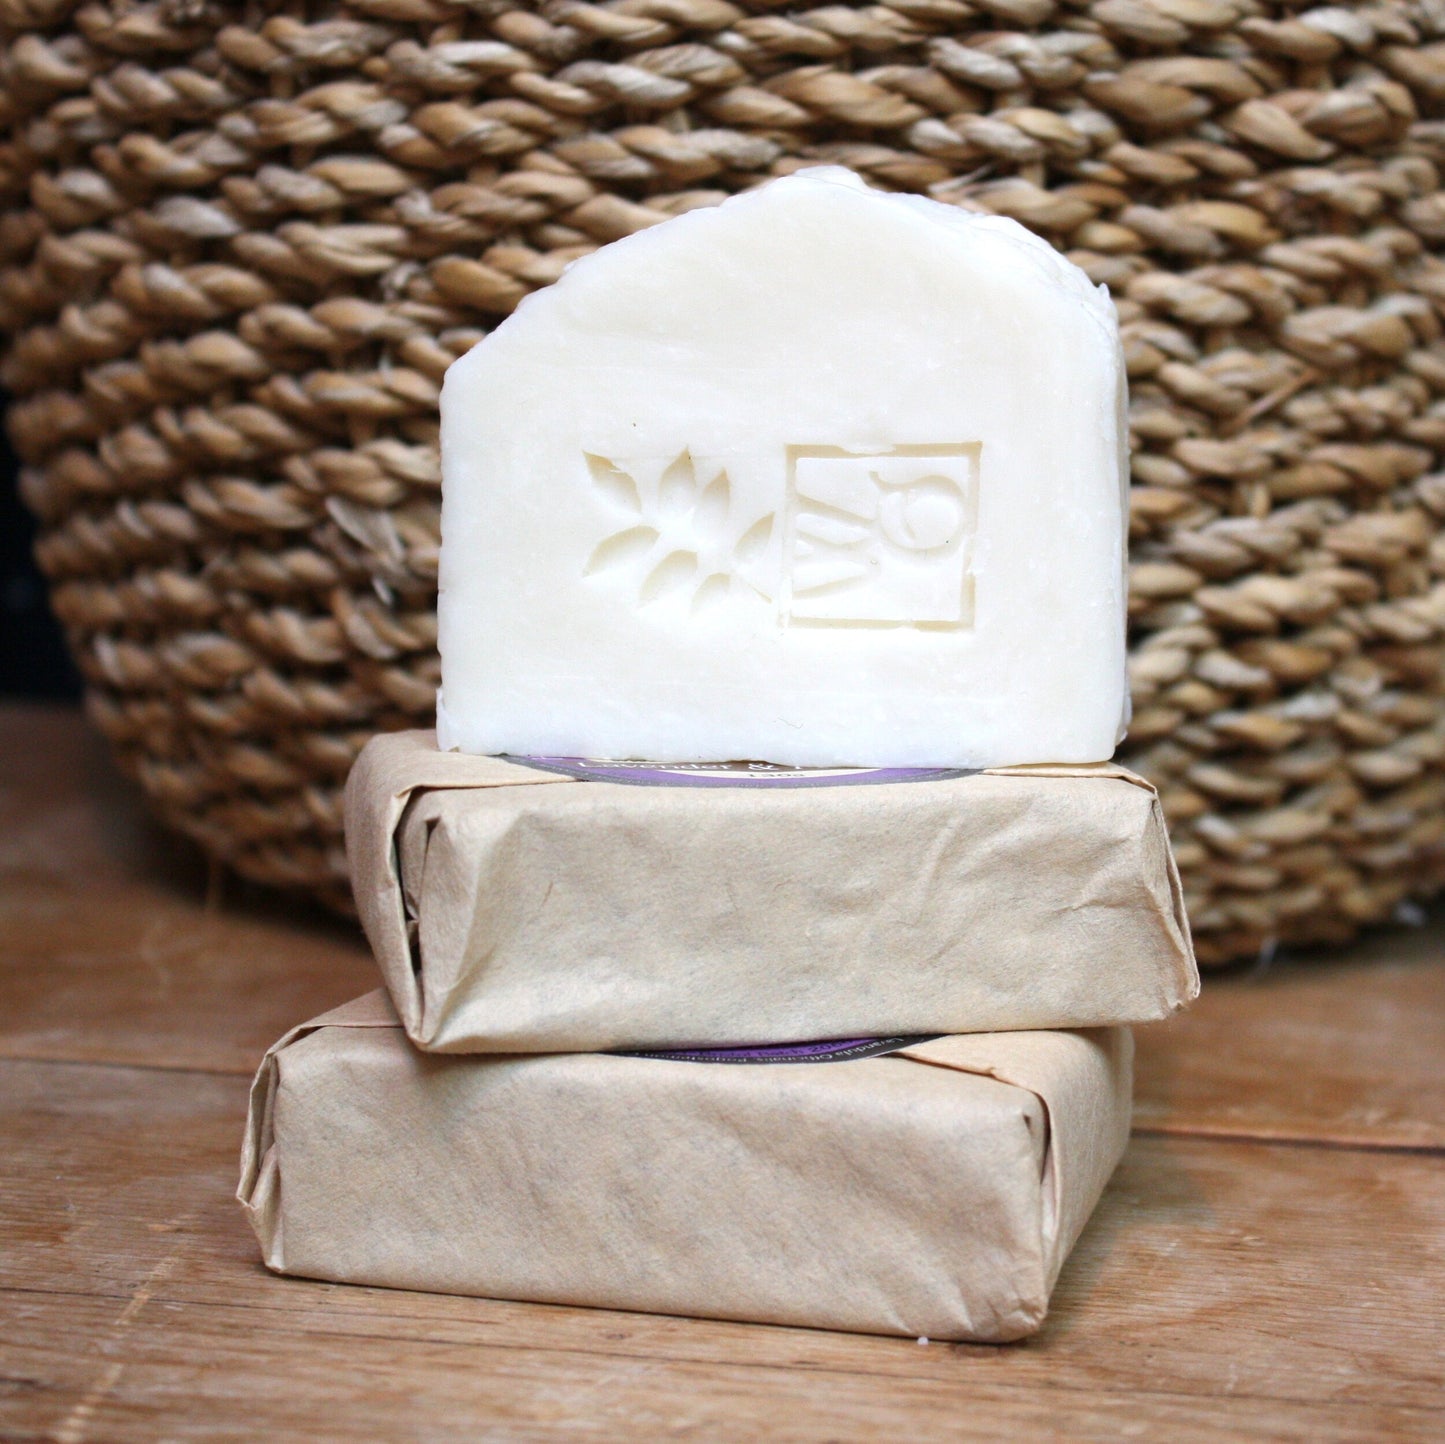 Handmade Lavender Patchouli Hot Process Soap - The Bristol Artisan Handmade Sustainable Gifts and Homewares.